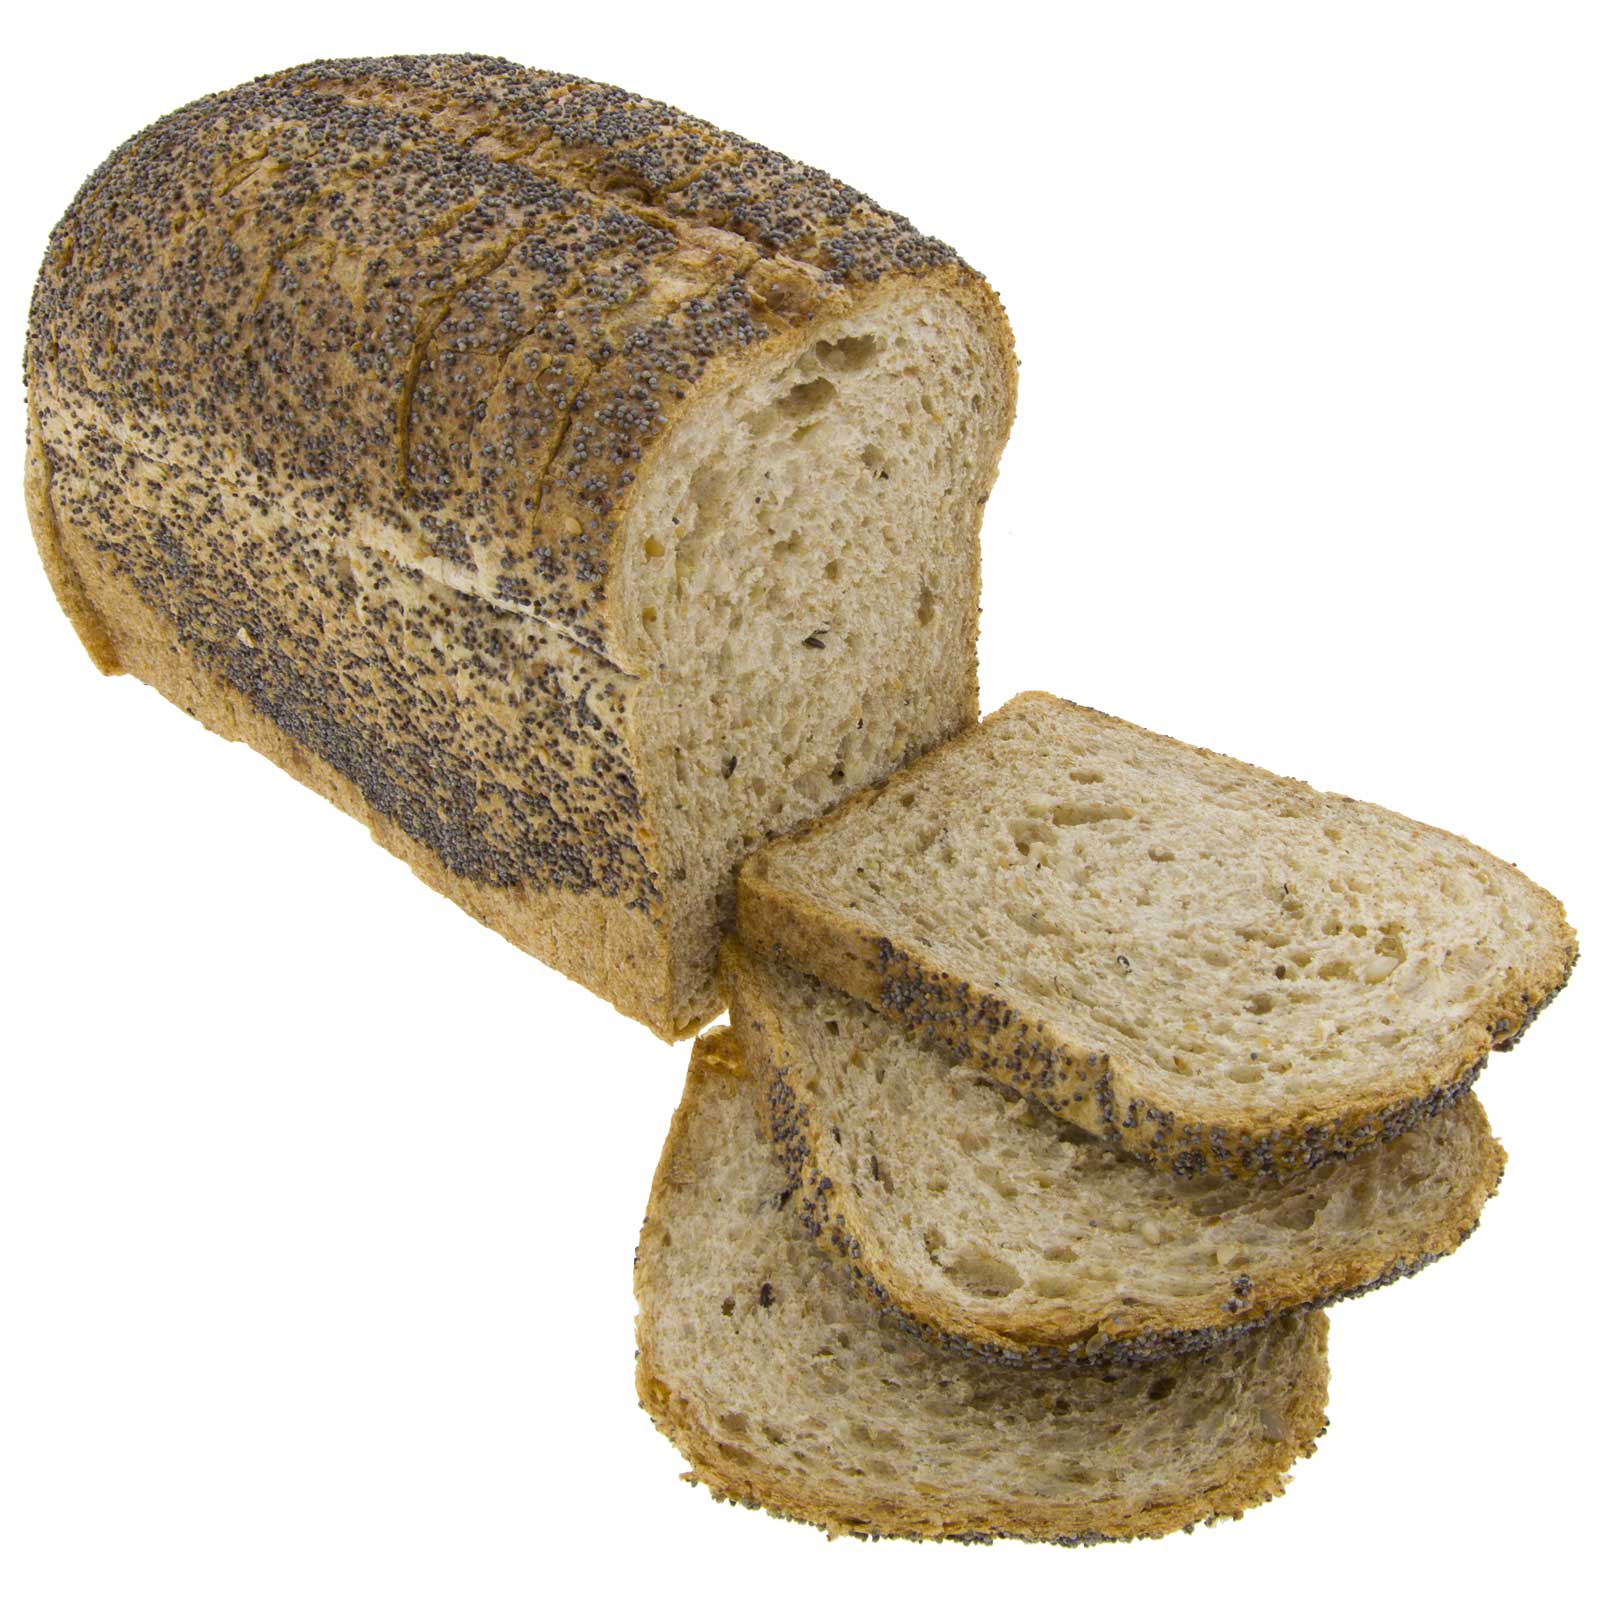 Full-length spell mold bread with ecological 450g seeds